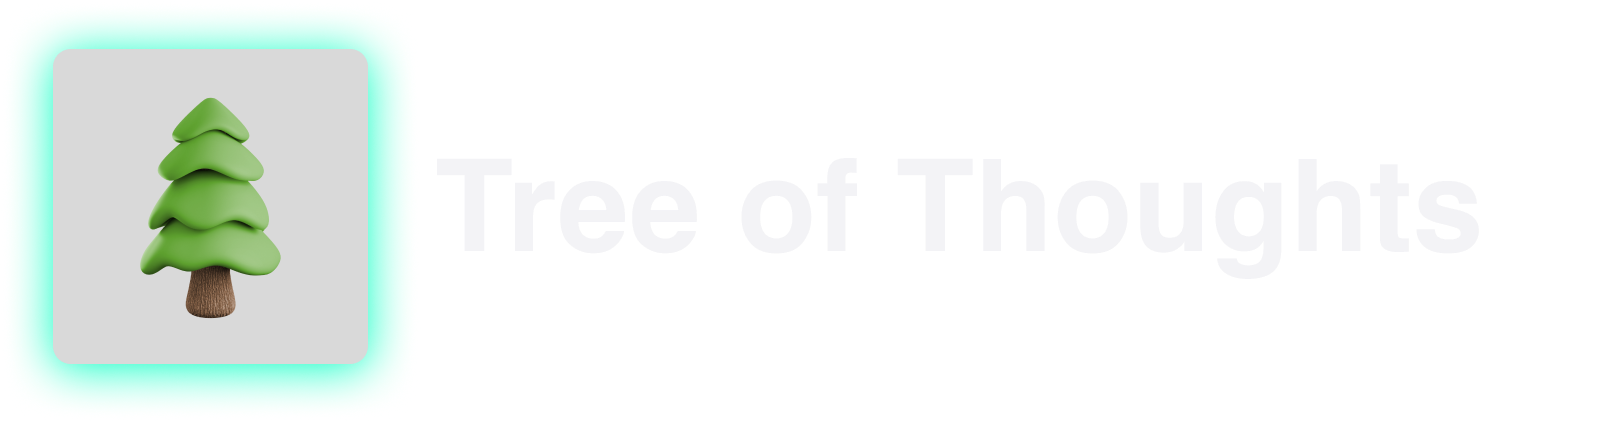 Tree of Thoughts Banner